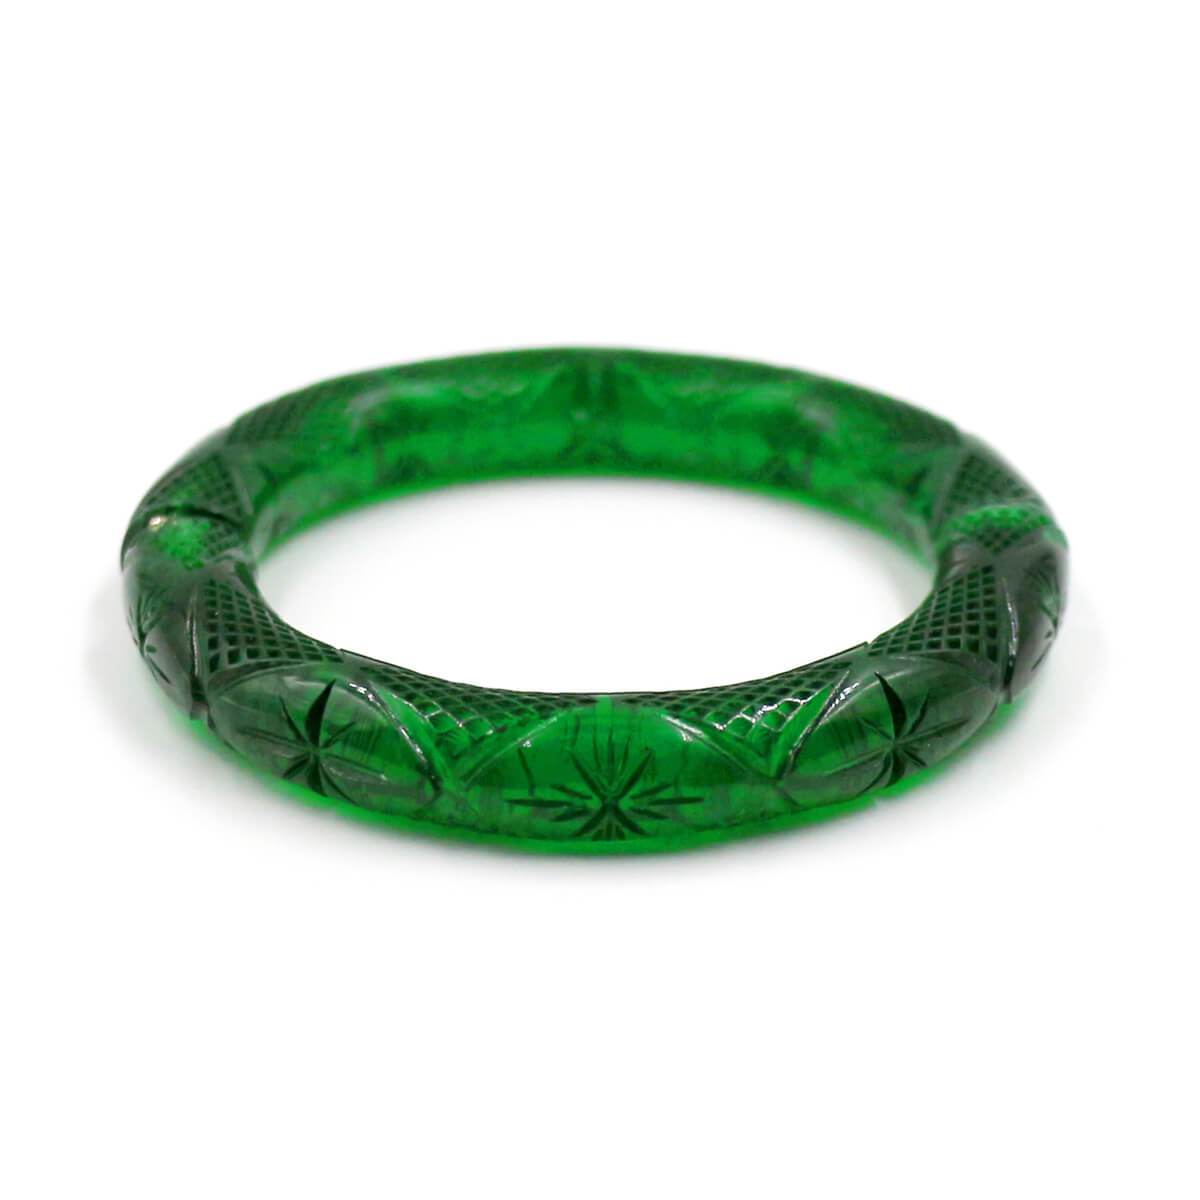 douglaspoon hand carved and polished resin bangle in emerald green